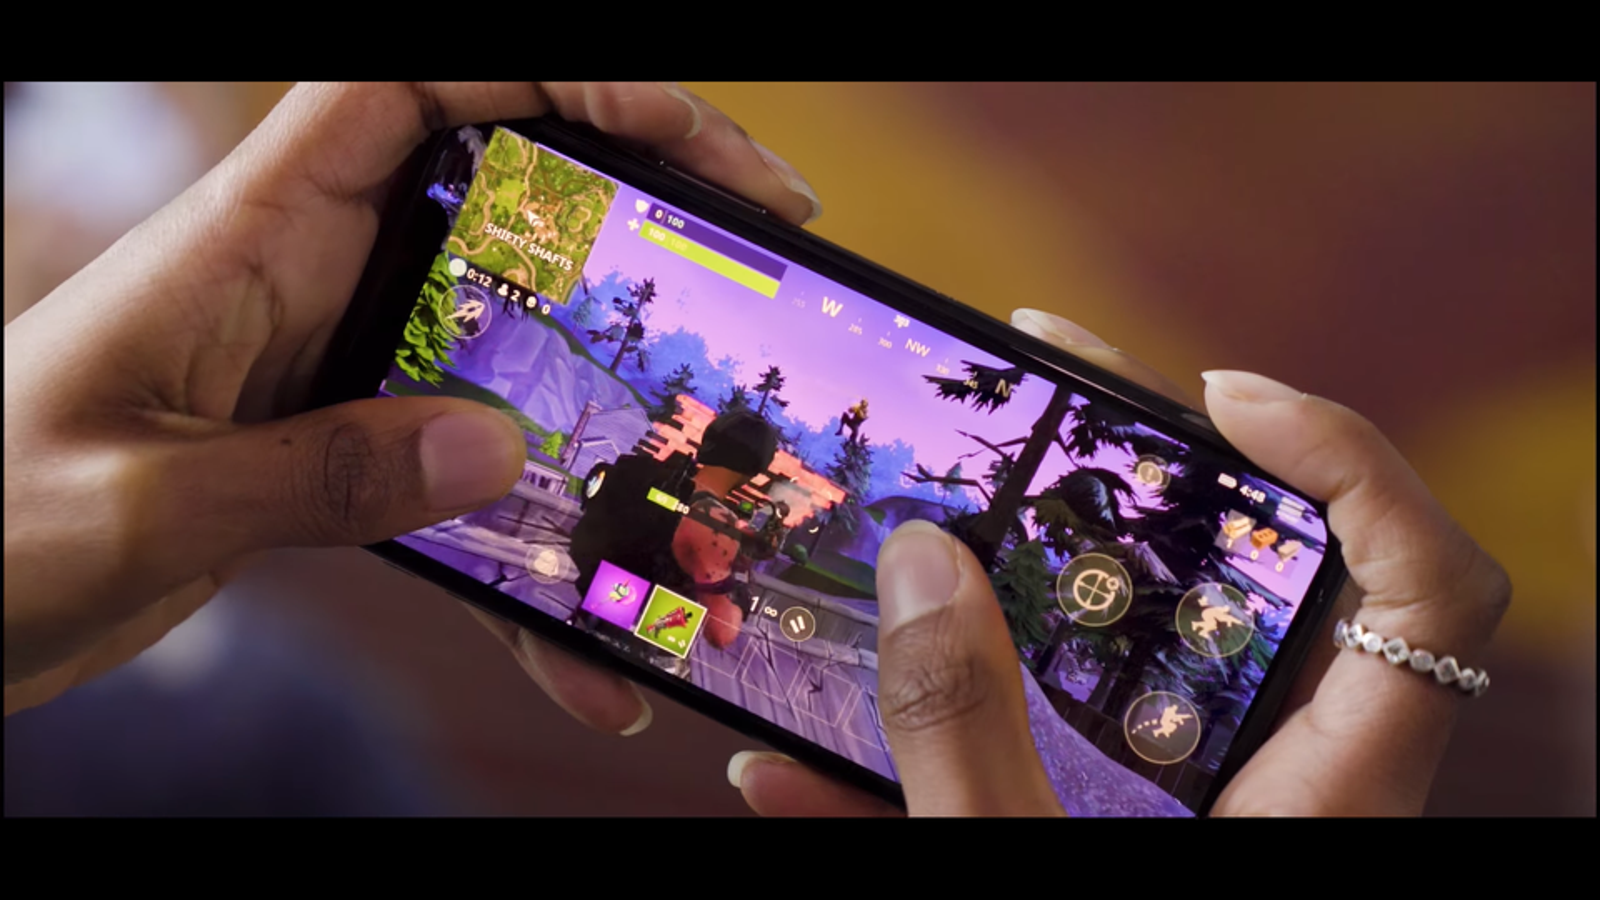 Fortnite Comes Back To iPhone Via GeForce NOW Cloud Gaming